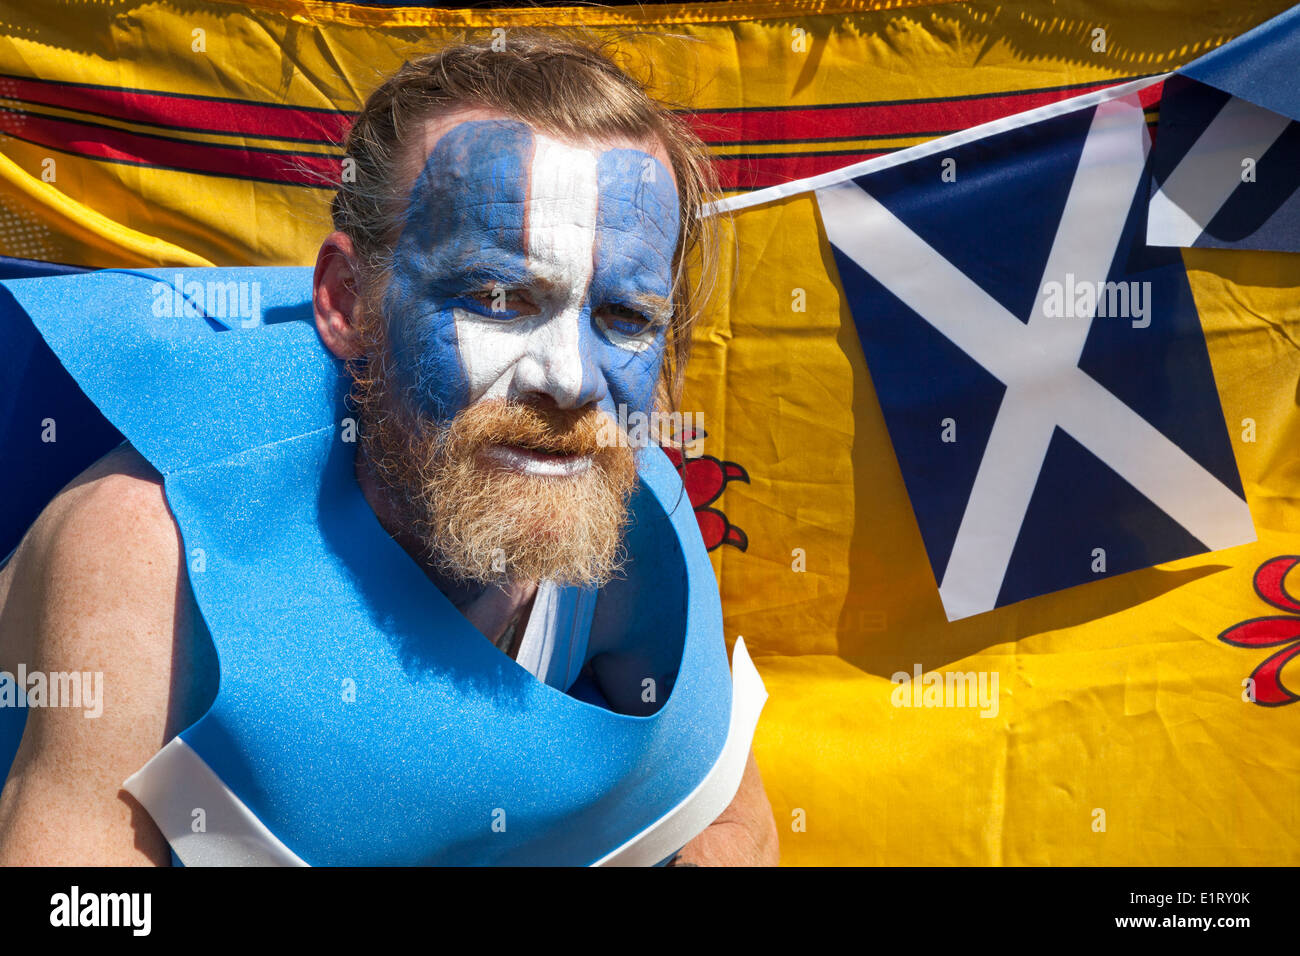 Man supporting independence with his face painted with blue and white, posing in front of the Scottish Saltire flag and Lion rampart flag Stock Photo